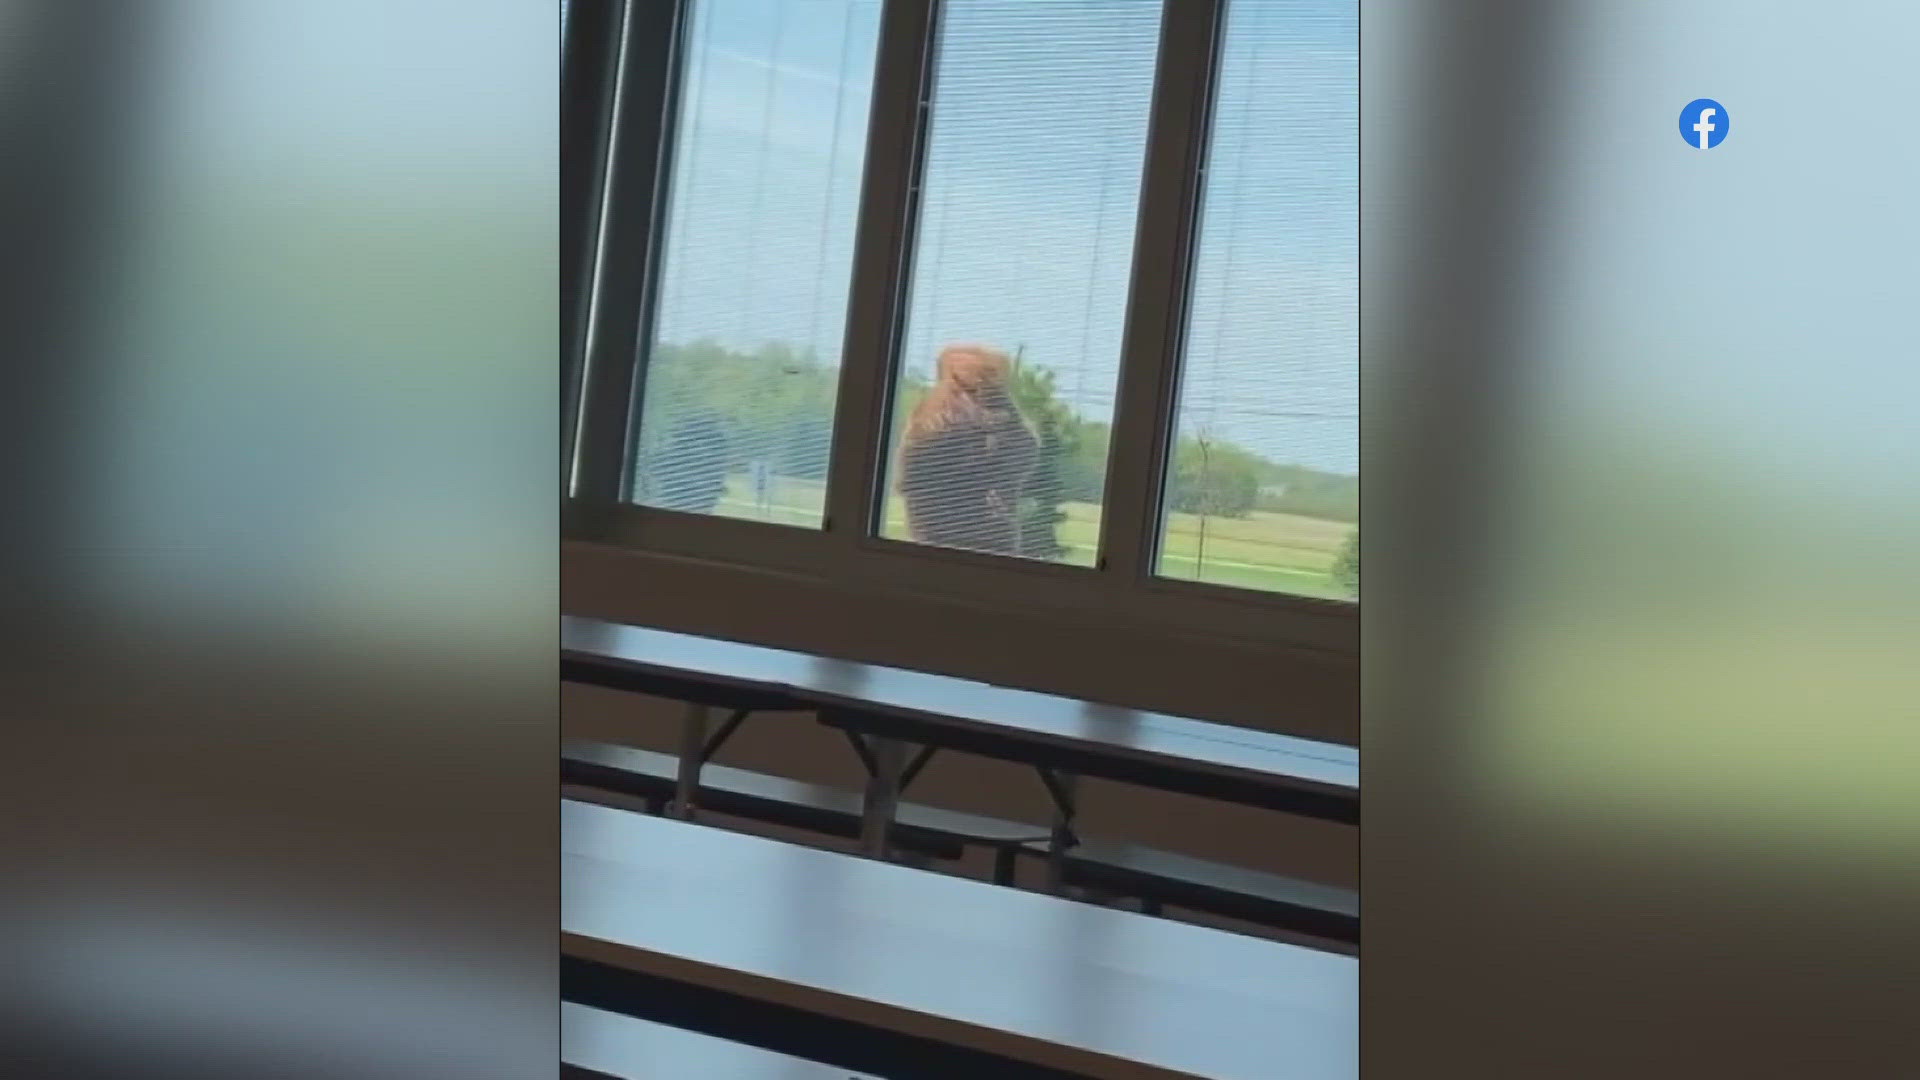 Classes at the Firelands Local School District in Lorain County were disrupted earlier this week by a person dressed up as Bigfoot.